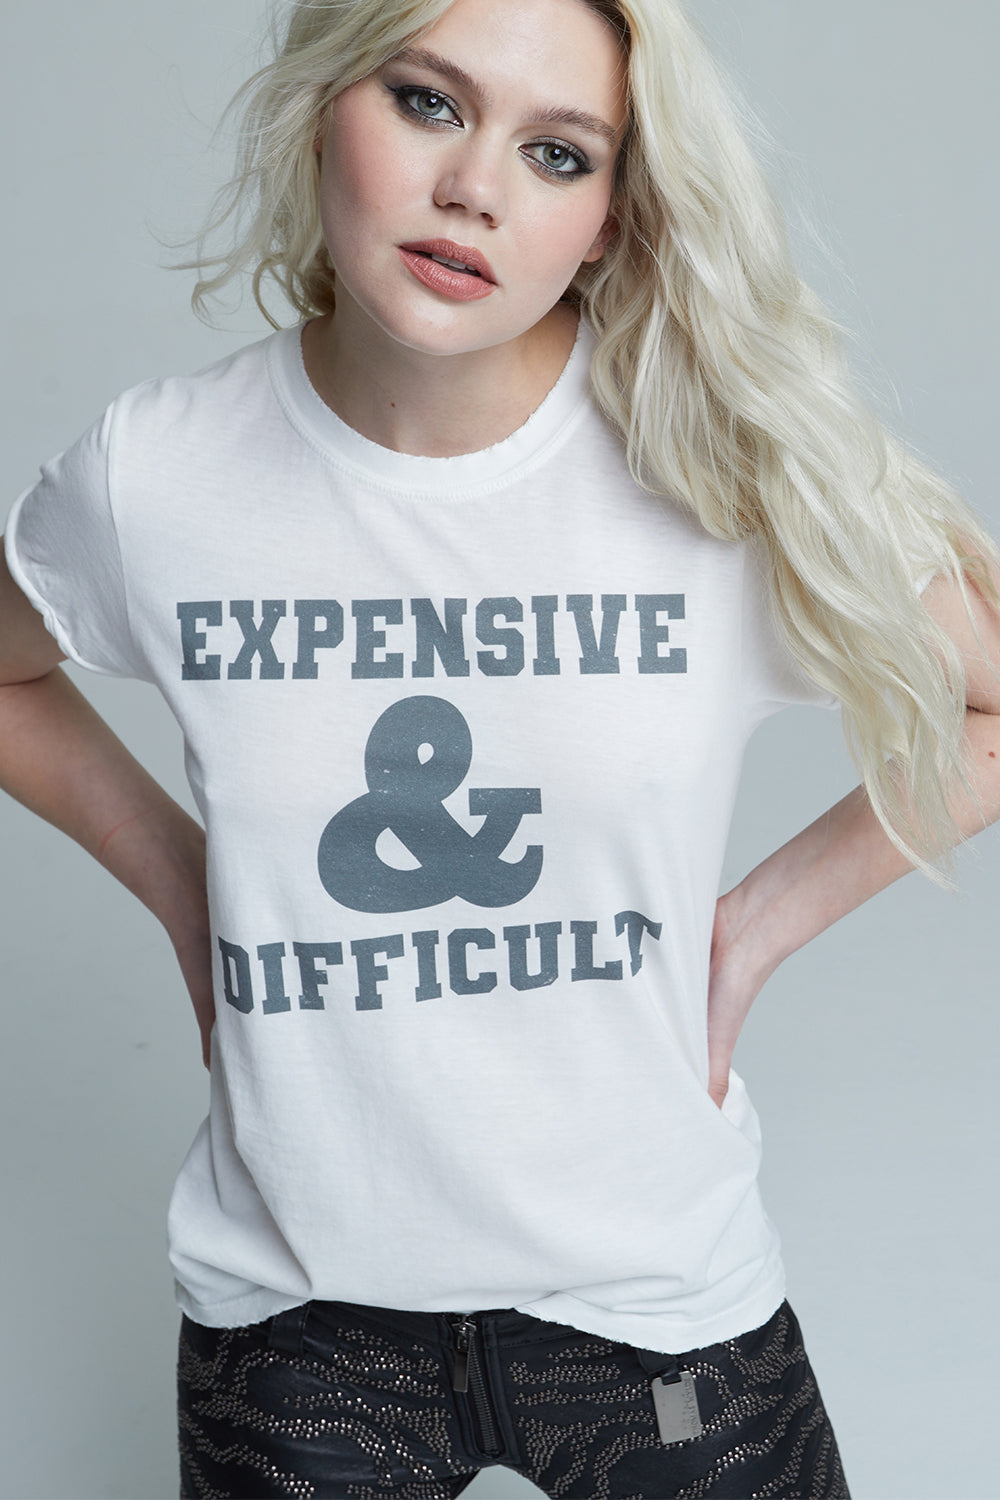 Expensive & Difficult White Tee